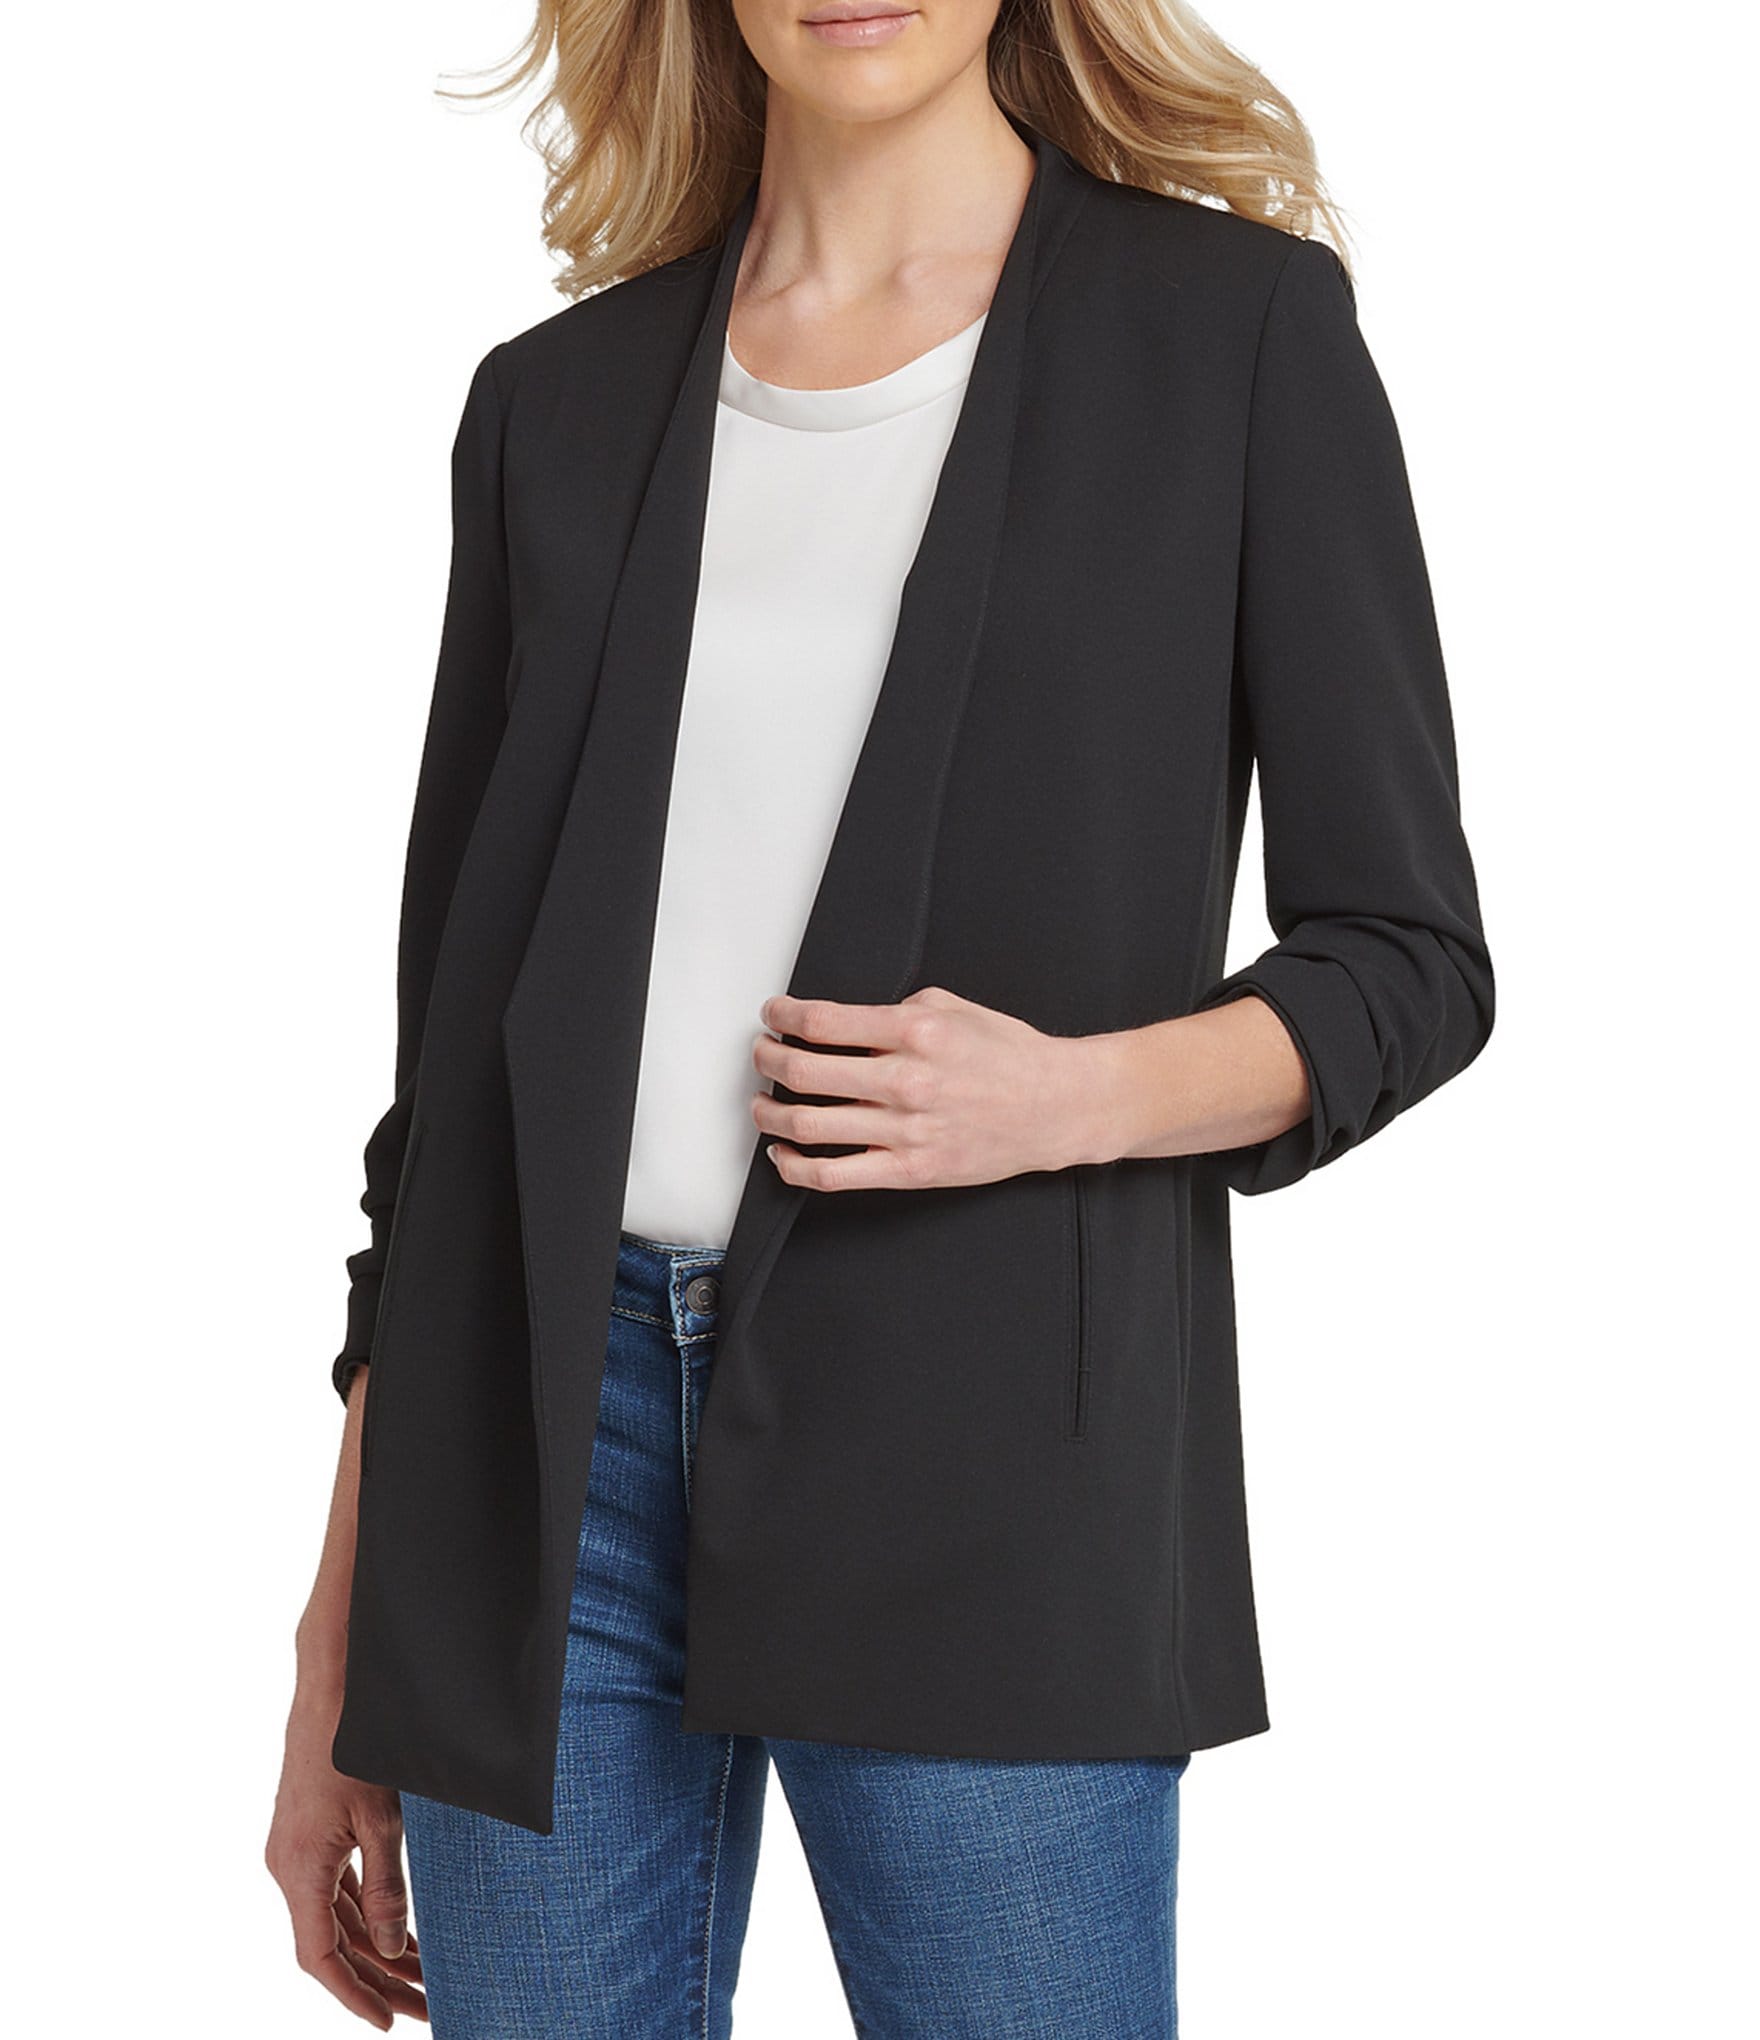 Dkny Scuba Crepe Ruched 3 4 Sleeve Open Front Jacket Dillards